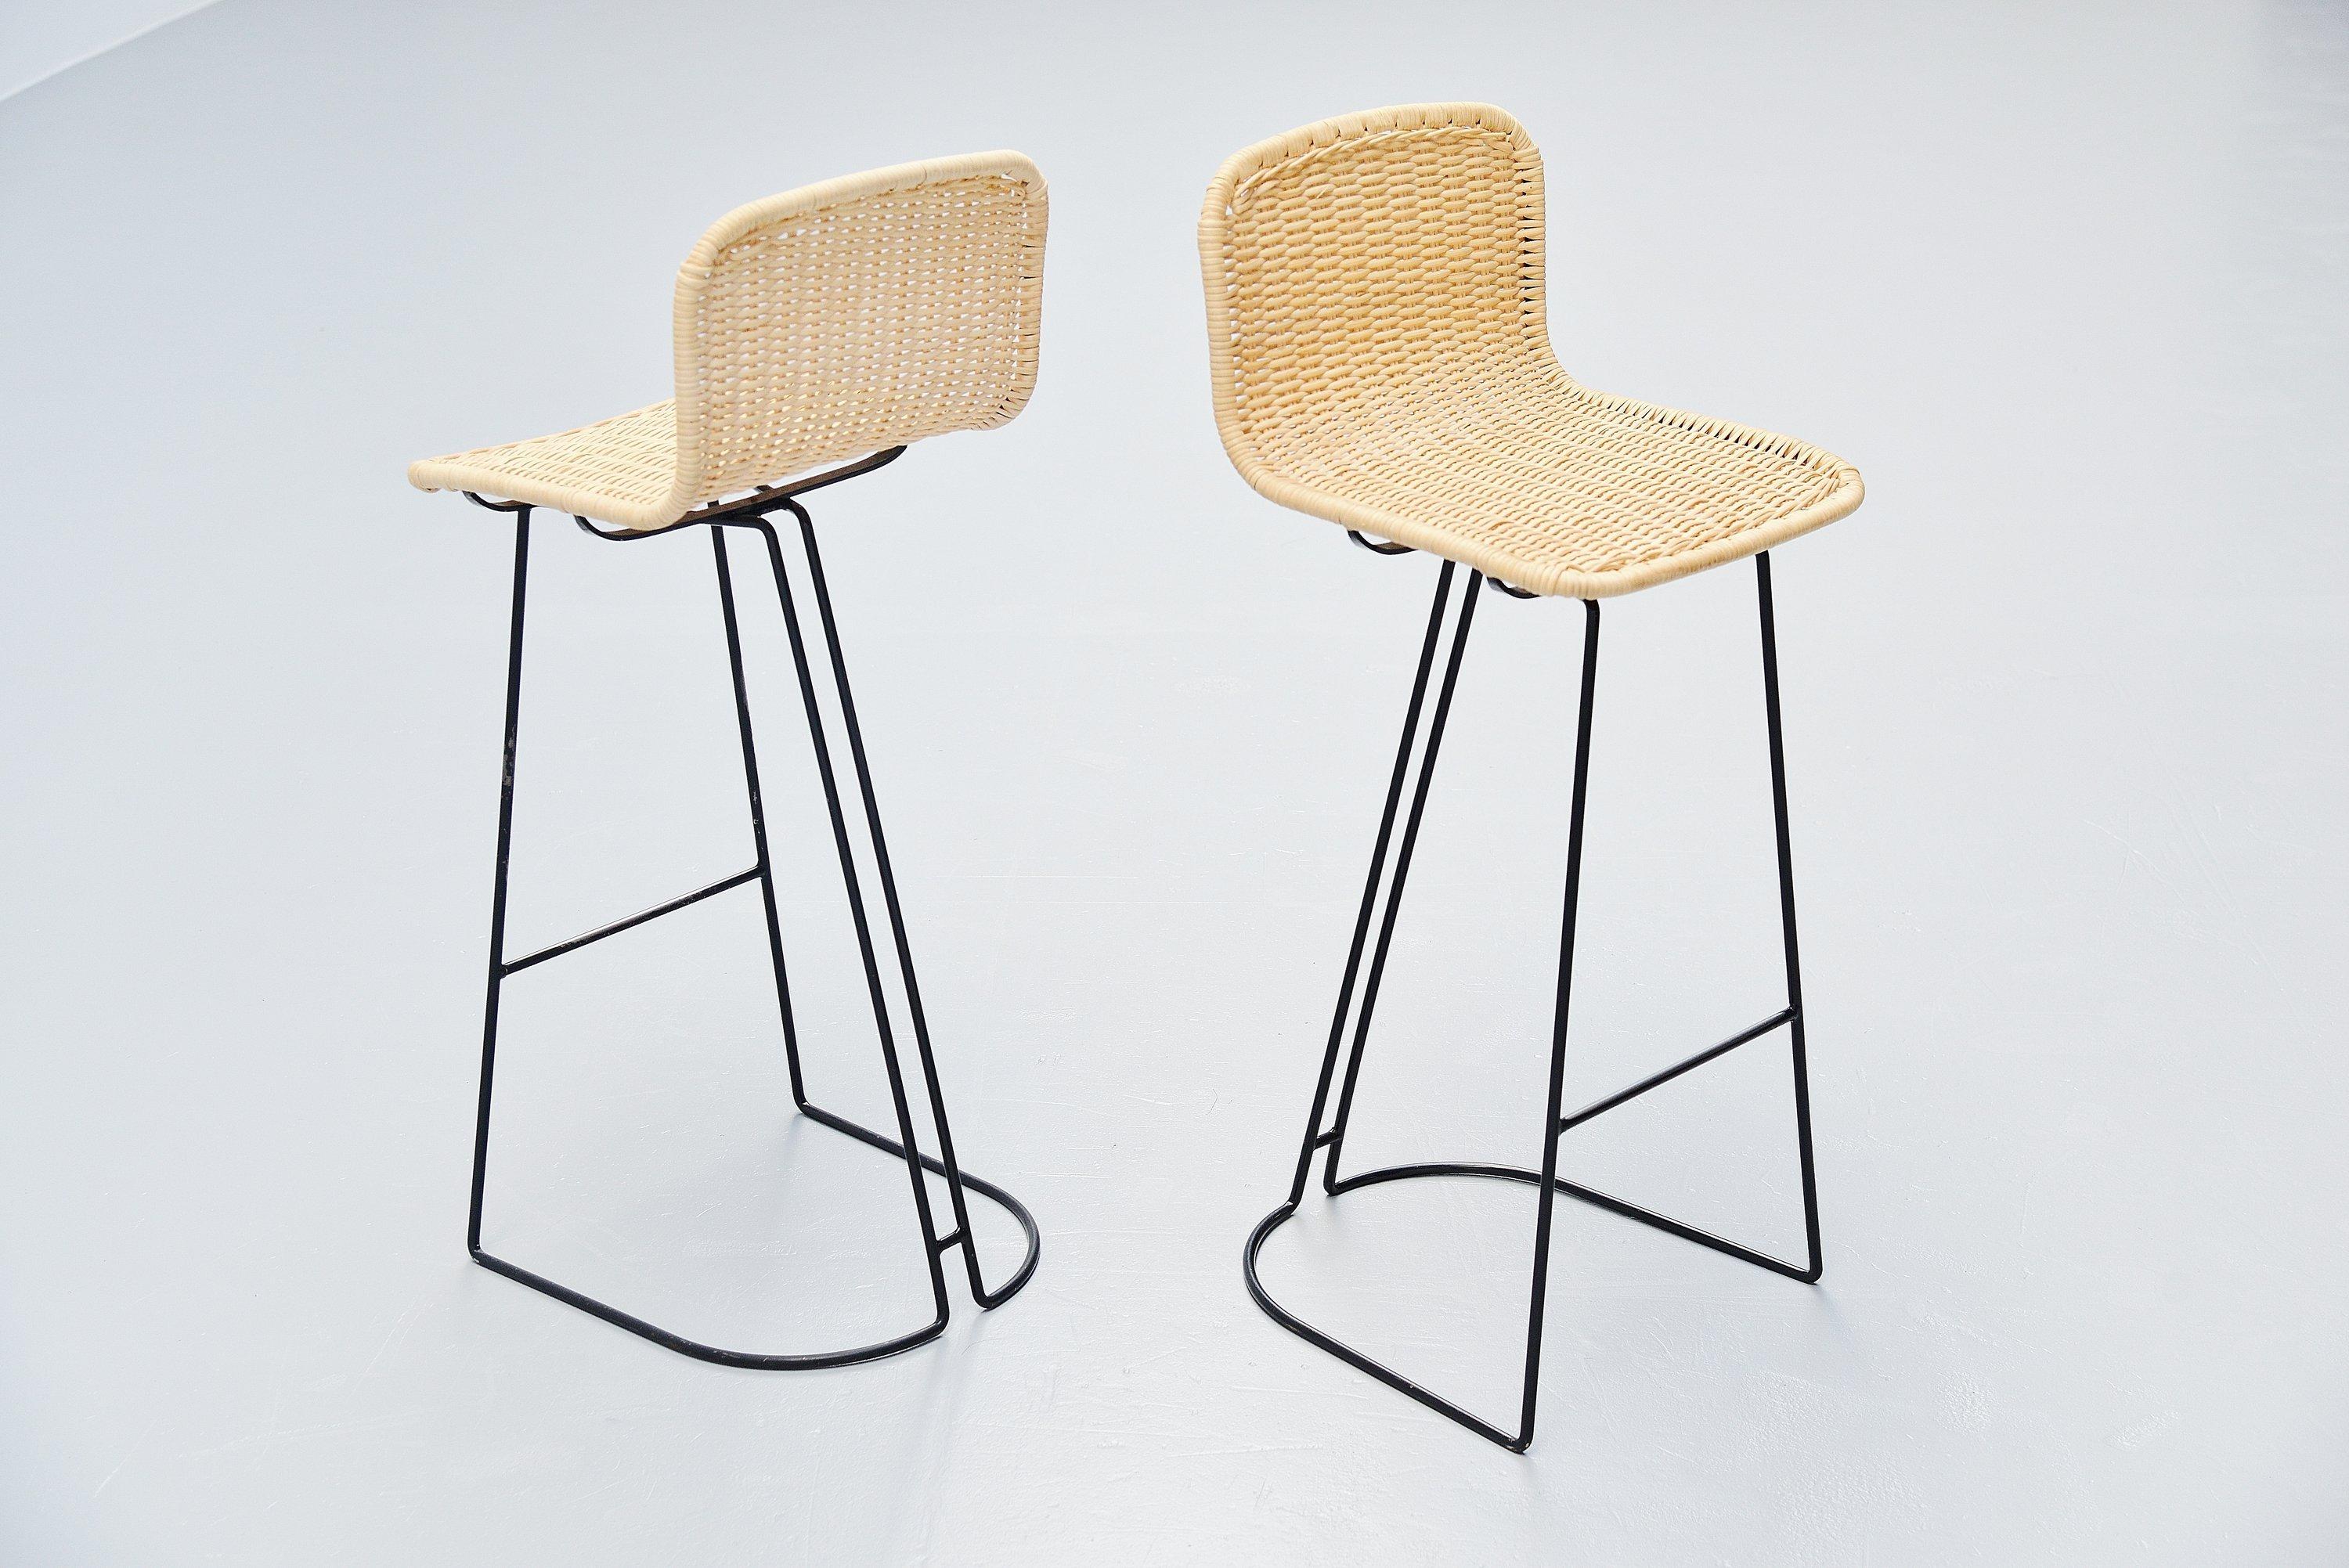 Late 20th Century Dutch Modernist Bar Stools in Cane, Holland, 1970 For Sale